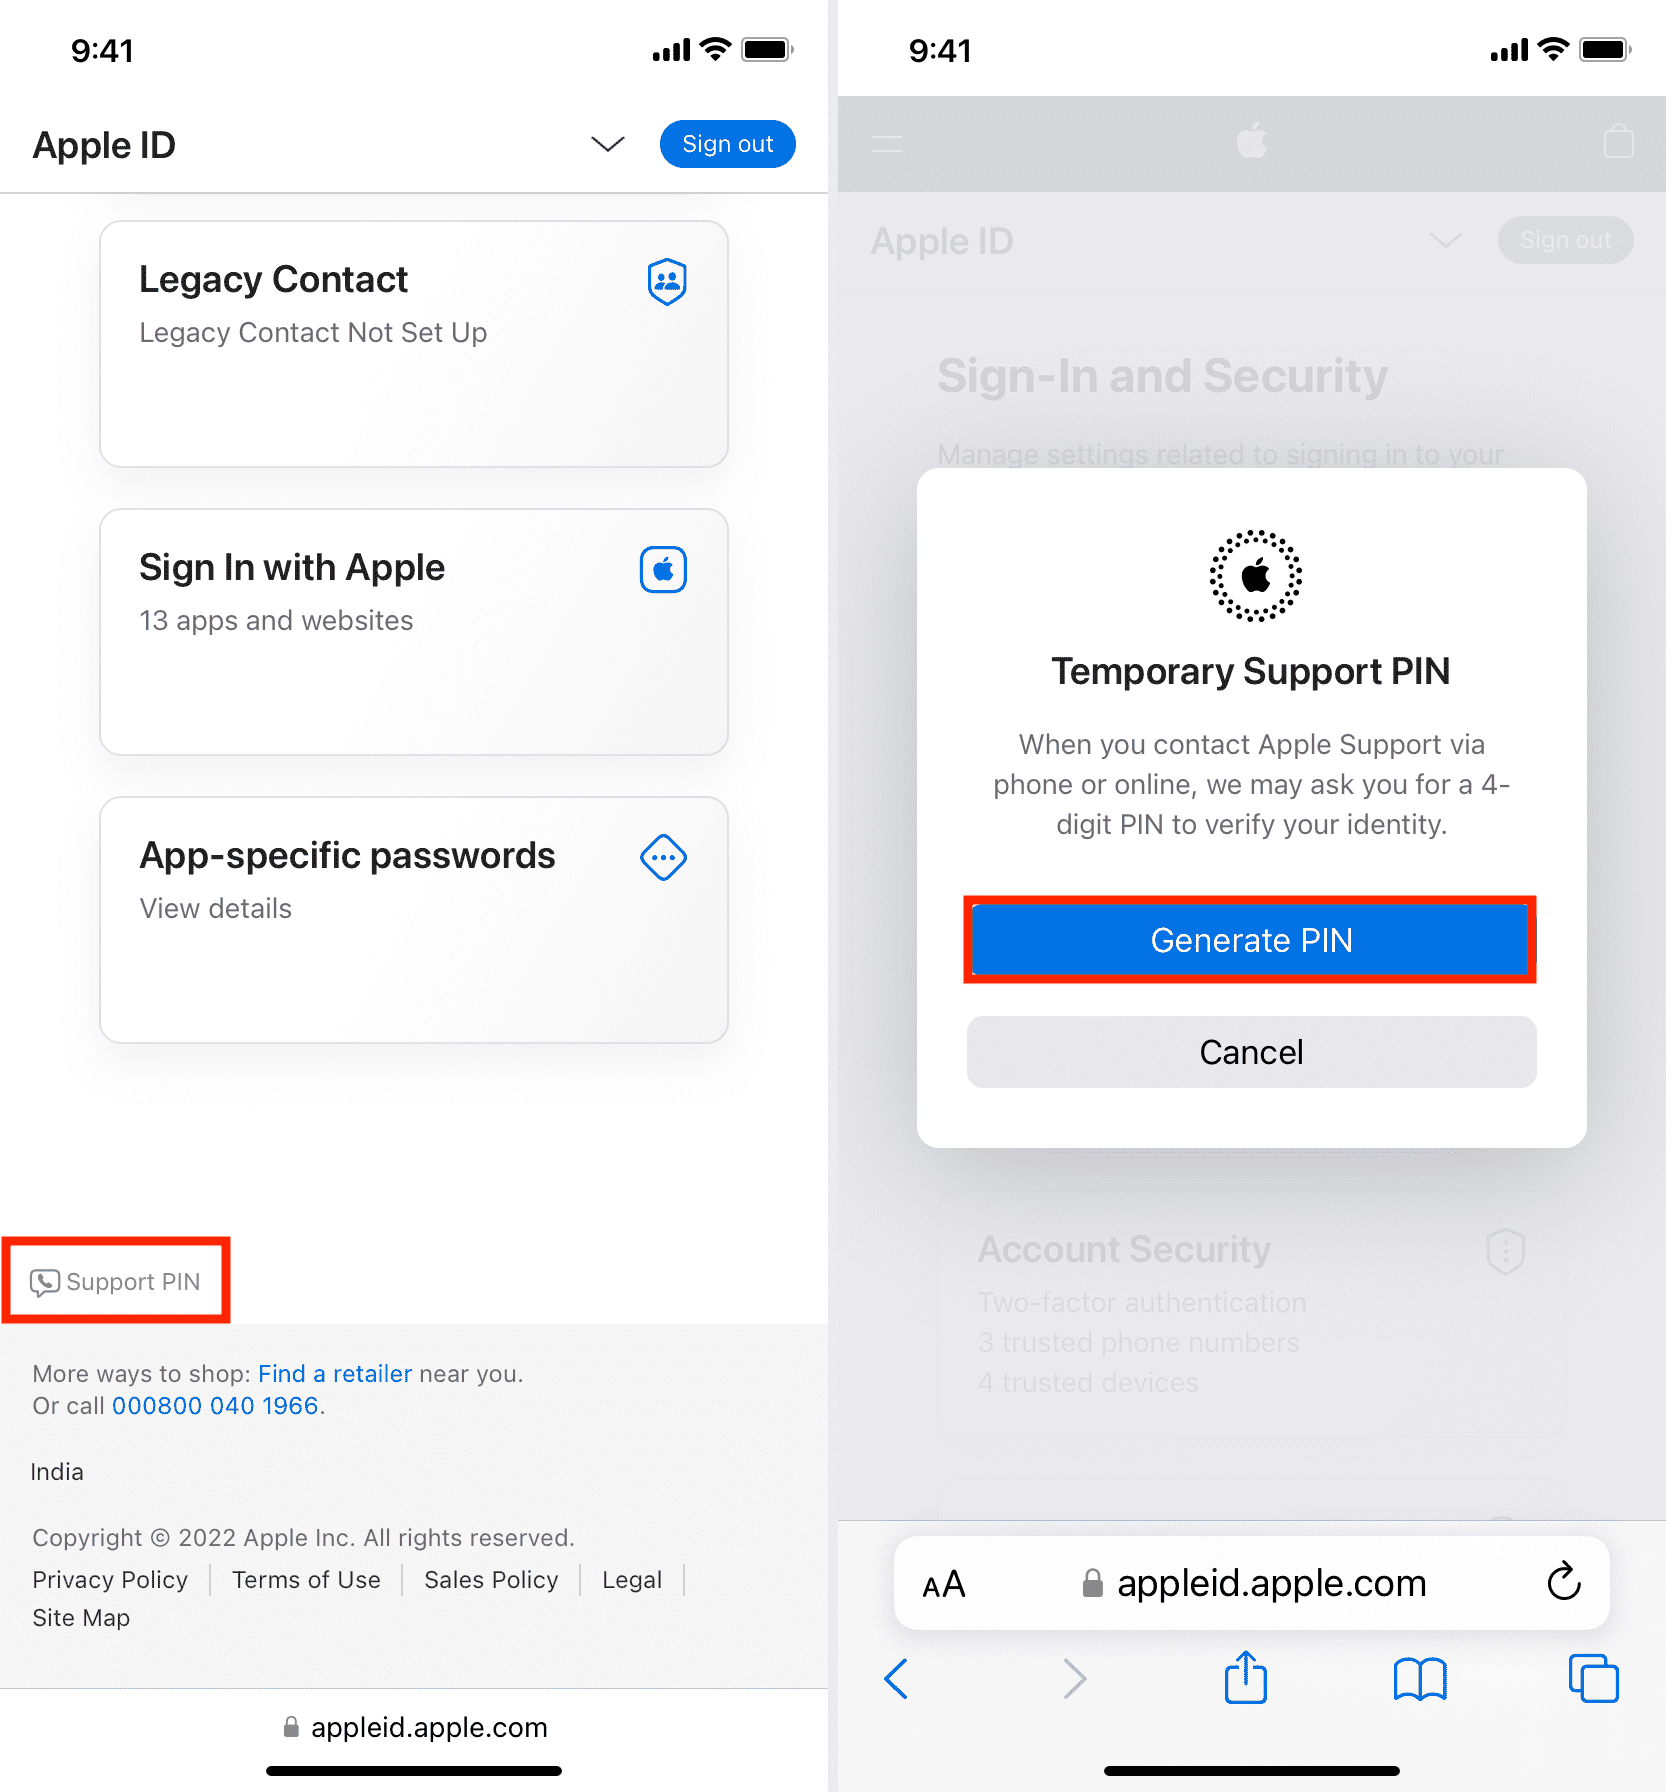 How to generate PIN for Apple Support